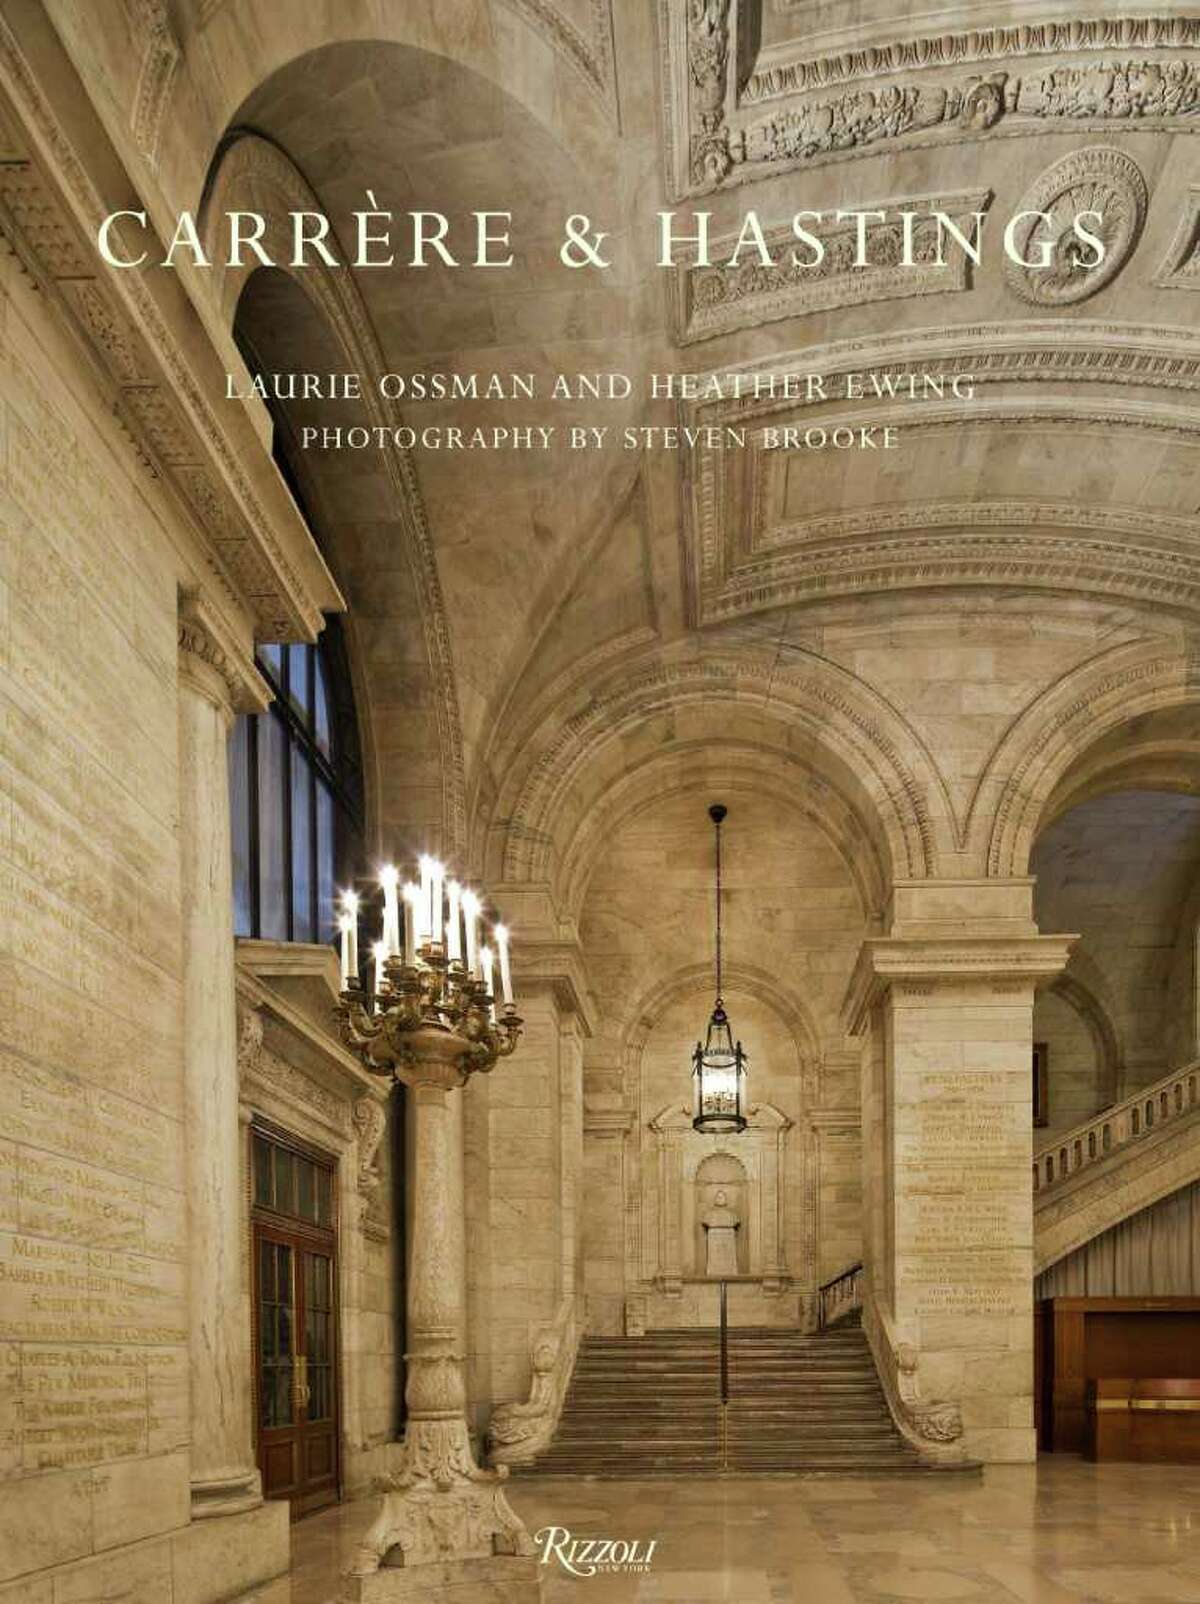 The new book "Carrere & Hastings: The Masterworks" is co-authored by former Greenwich resident Heather Ewing. The book tells the story of two architects, one of whom, Thomas Hastings, married into the Greenwich family of Commodore E.C. Benedict